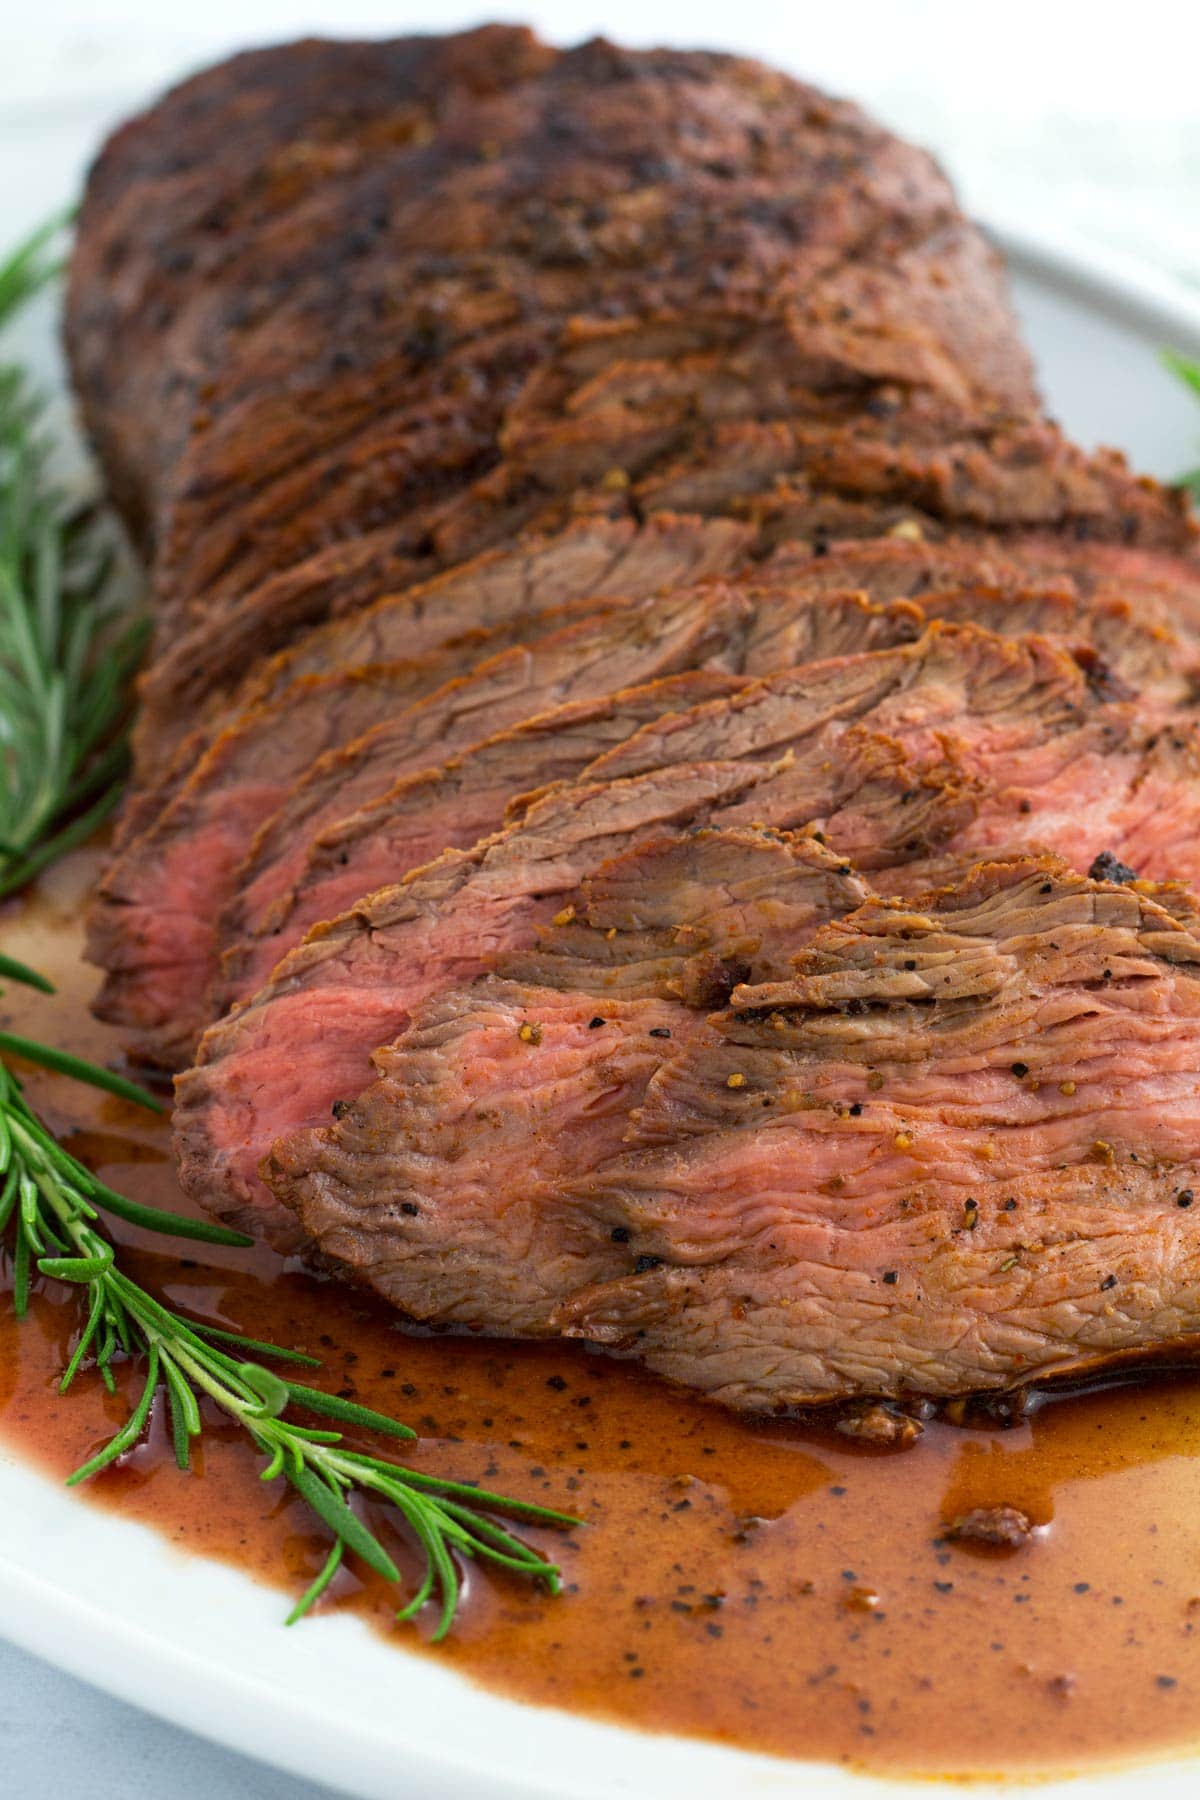 Juicy, tender smoked tri-tip sliced and ready to serve.